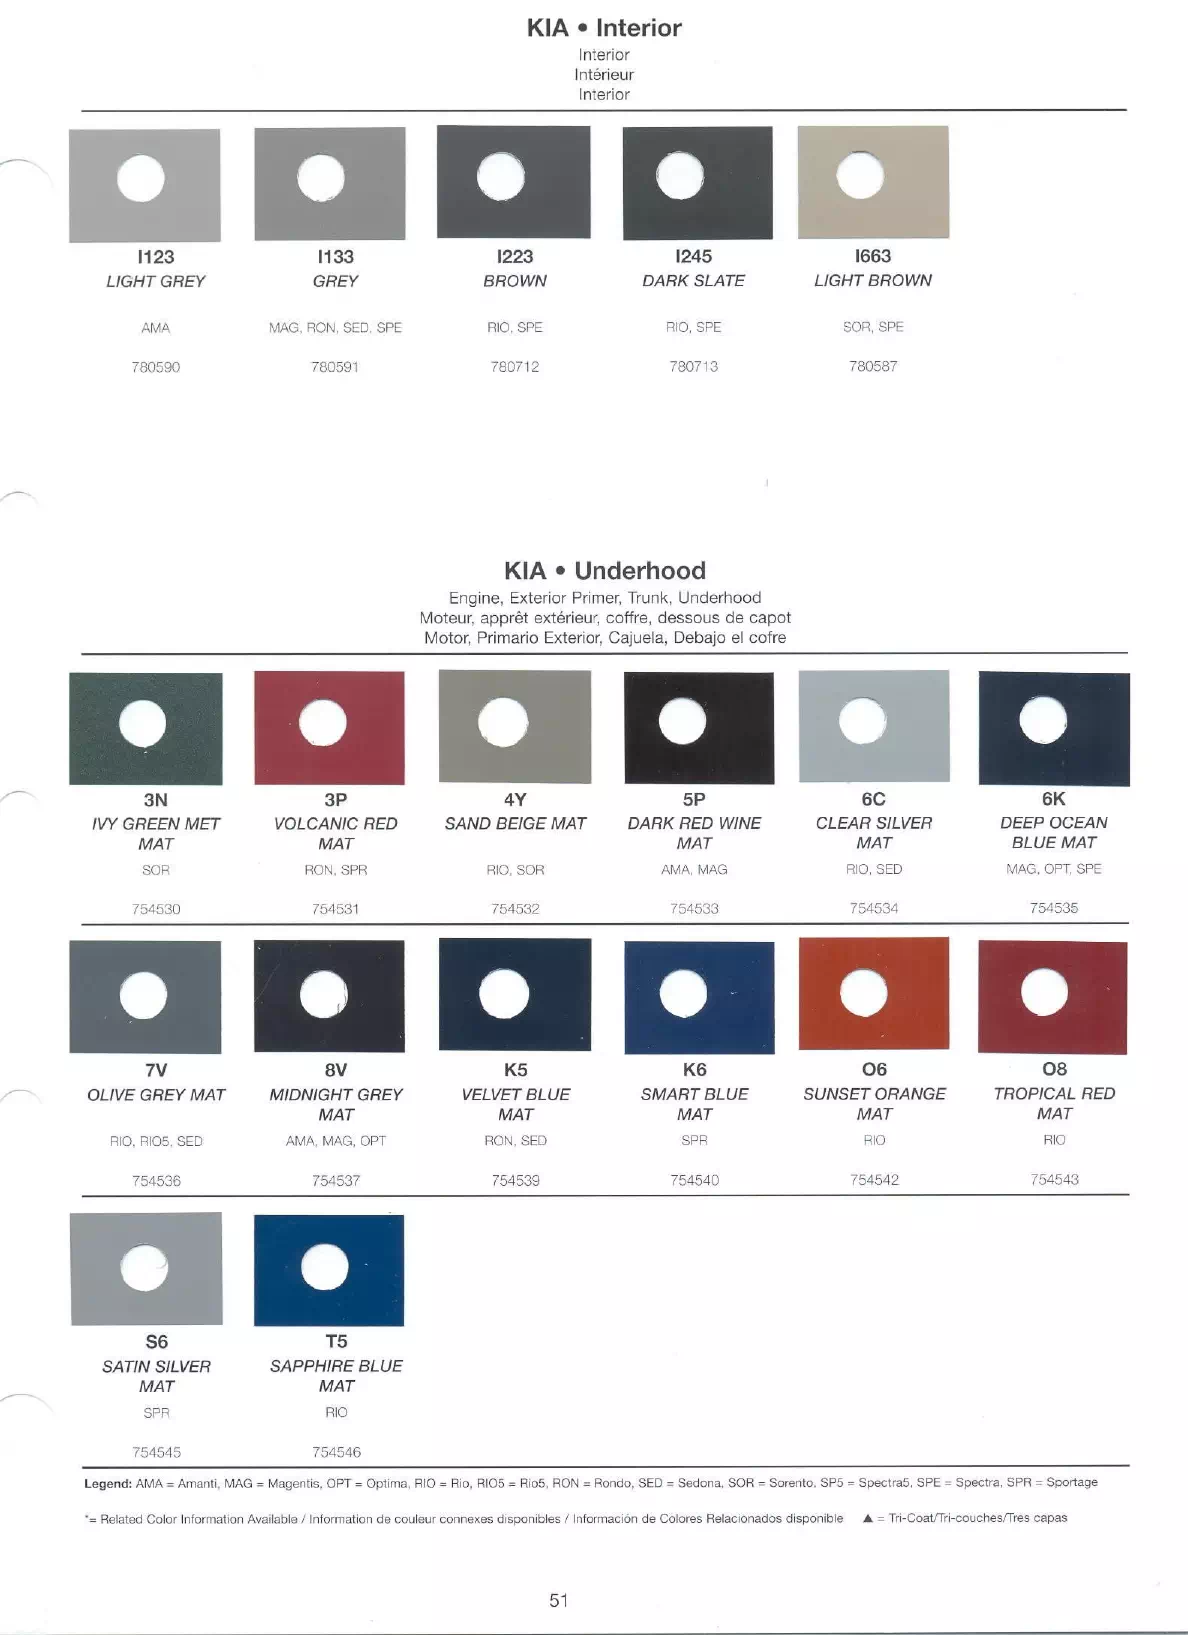 Exterior Paint Colors for Kia Vehicles in 2008